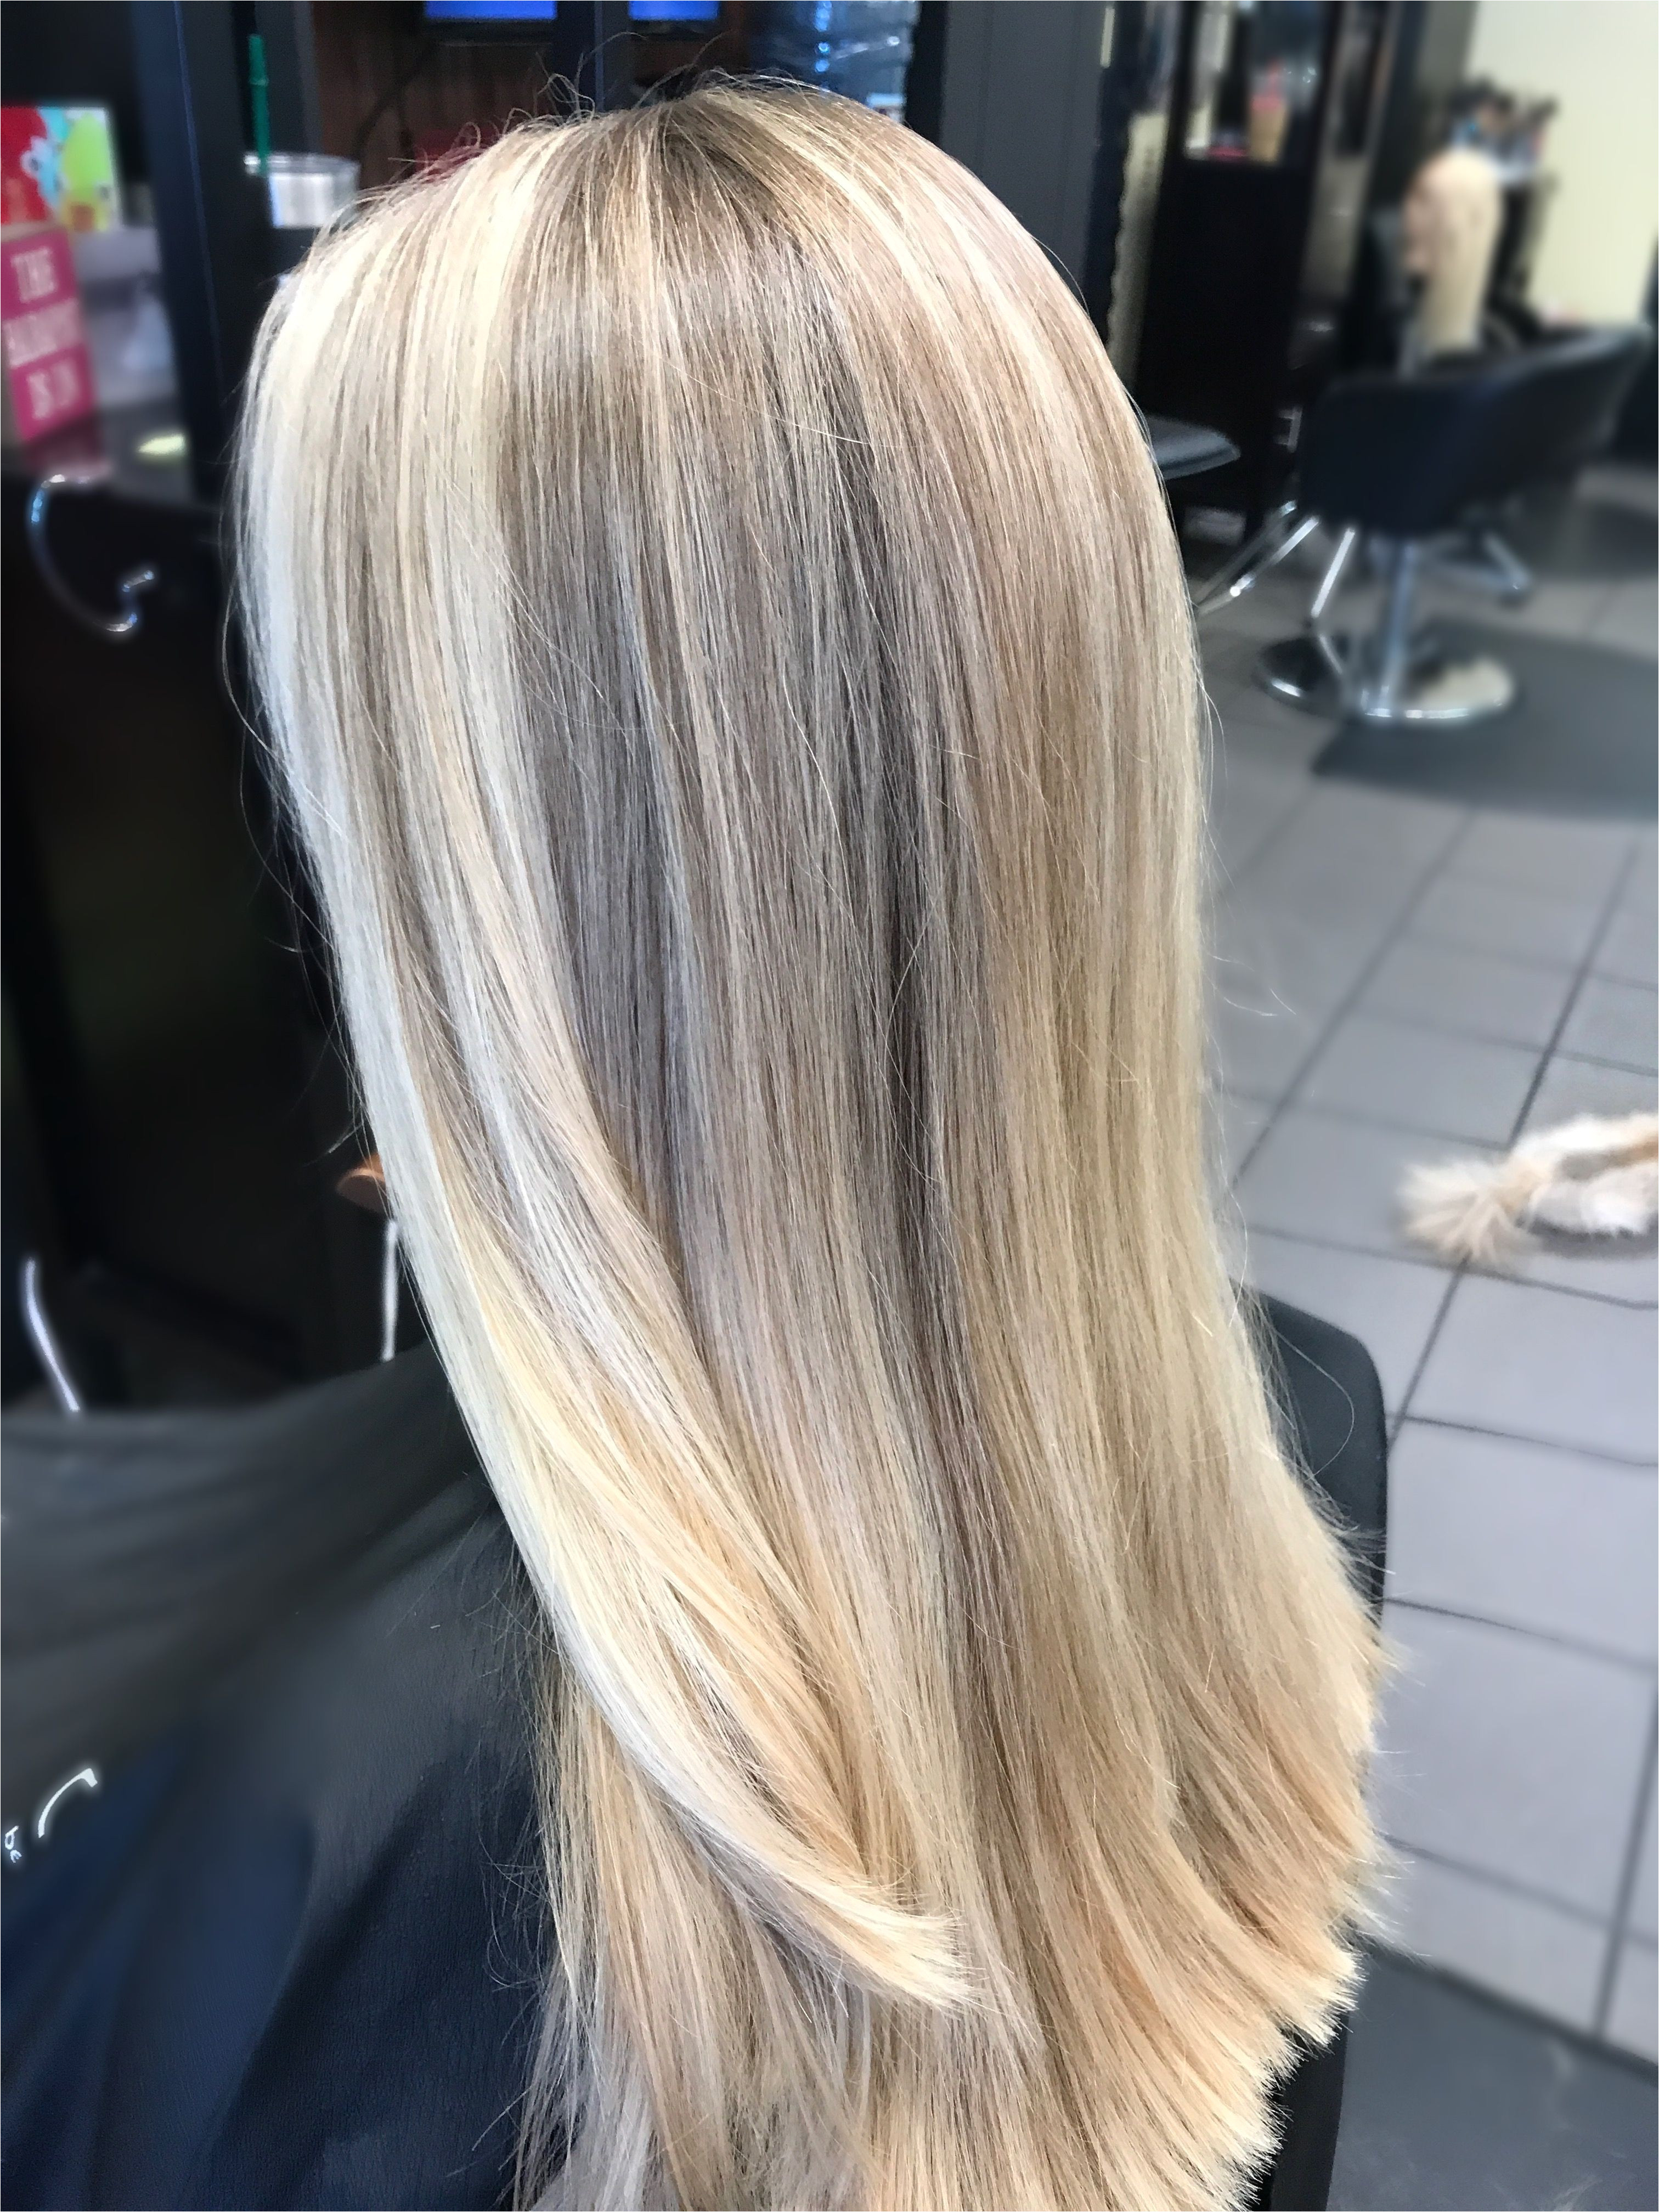 Blonde Hair Stylist Elegant Hairstyles With Blonde Highlights Collection I Pinimg 600x 18 0e 0d